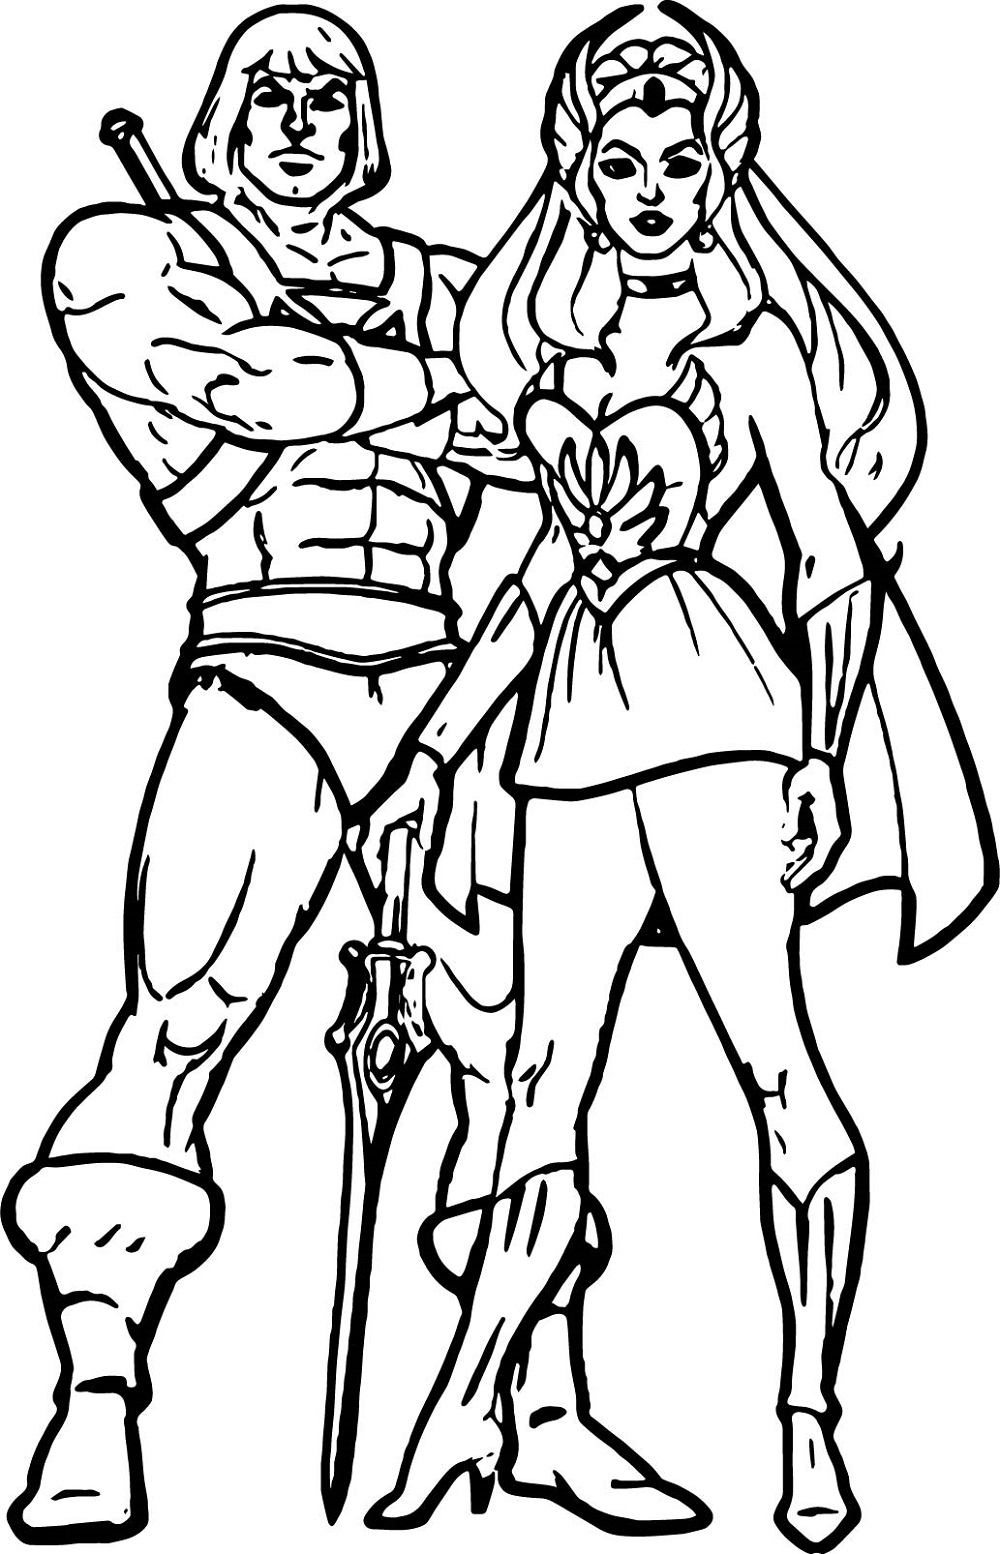 he man coloring pages 1